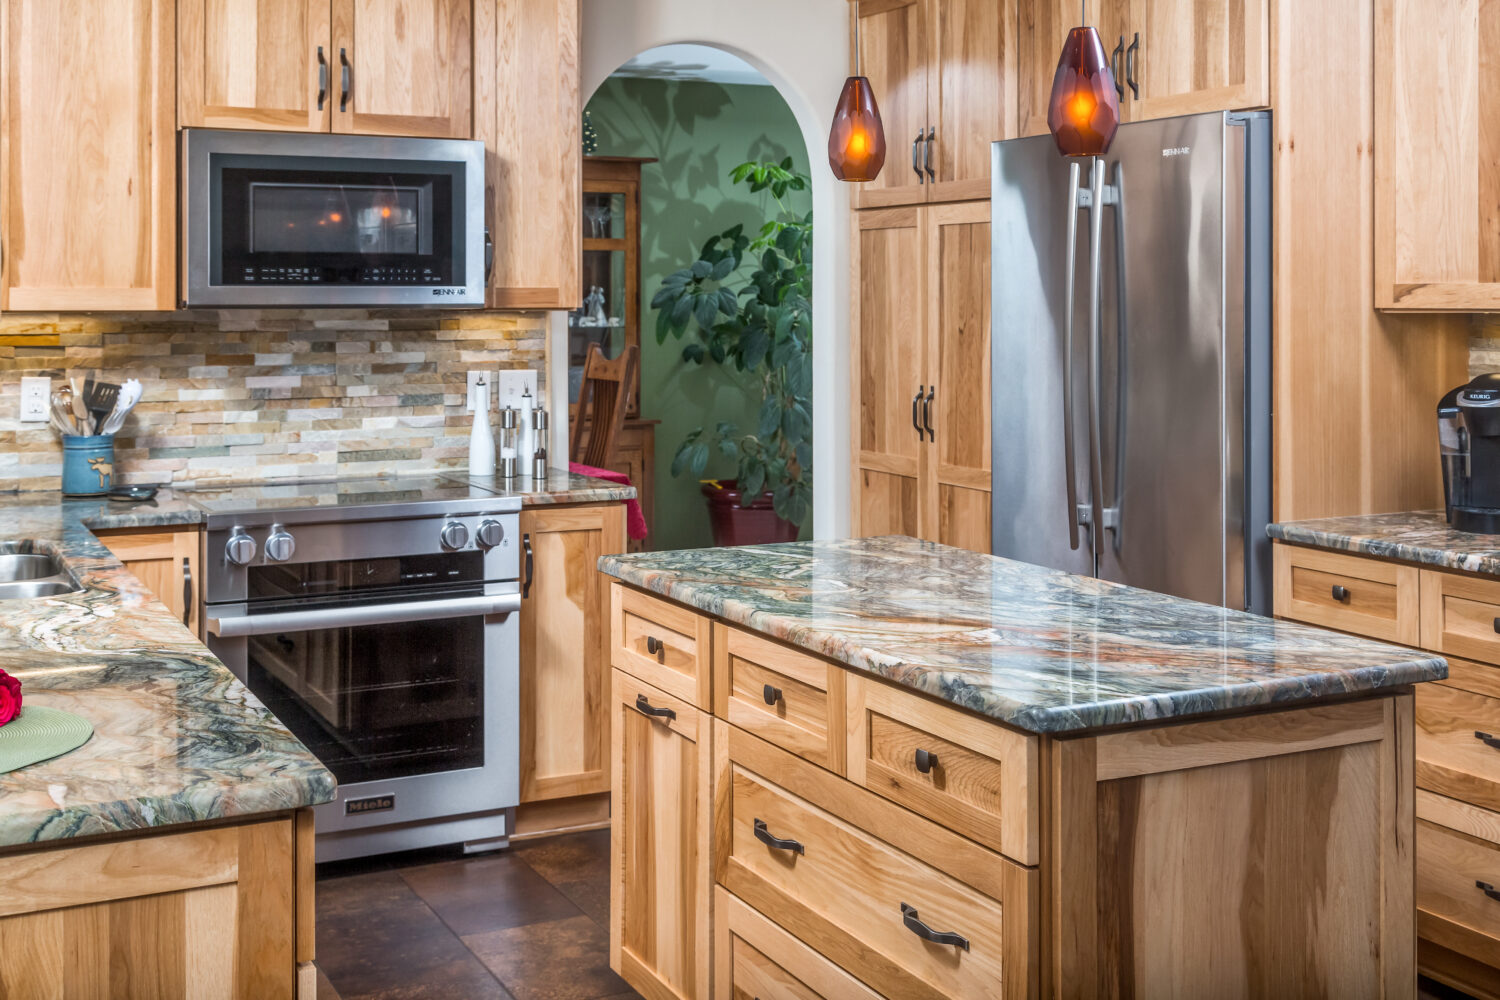 Cabin-Inspired Natural Hickory Kitchen Cabinets - Dura Supreme Cabinetry